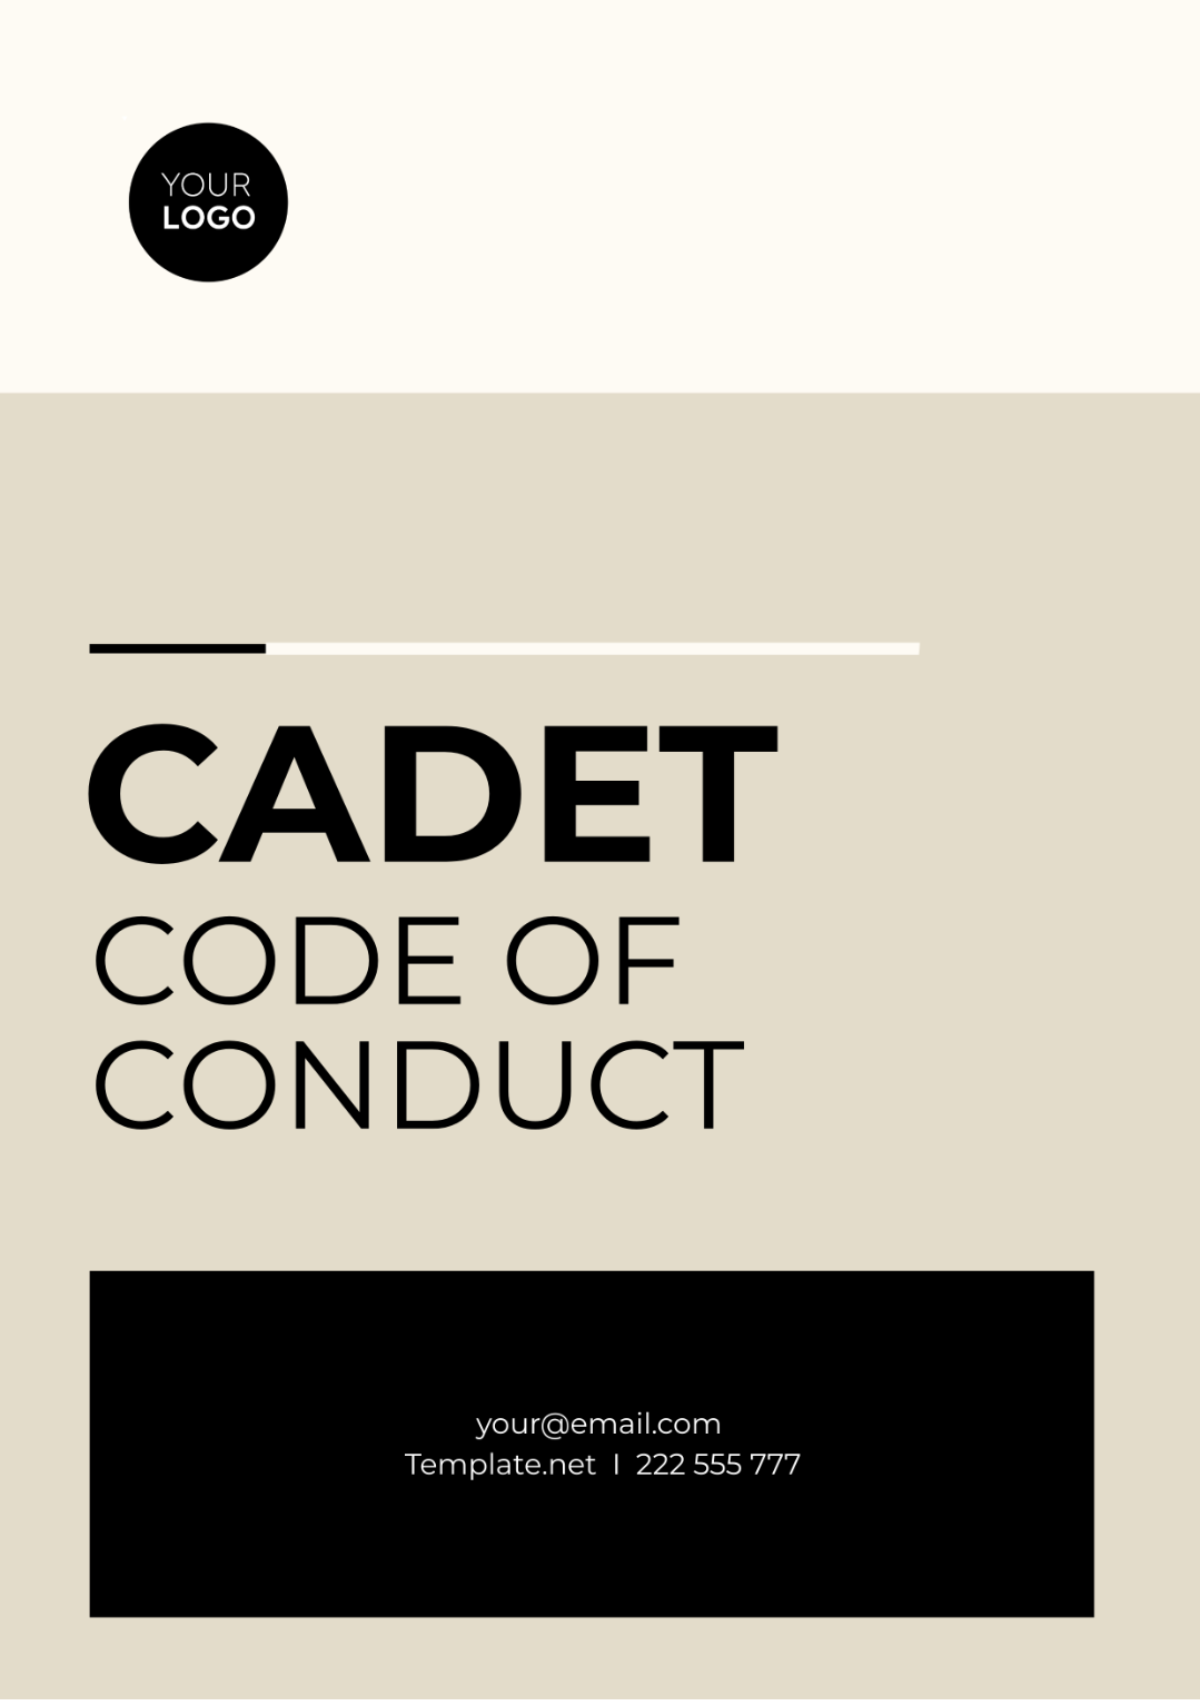 Cadet Code of Conduct Template